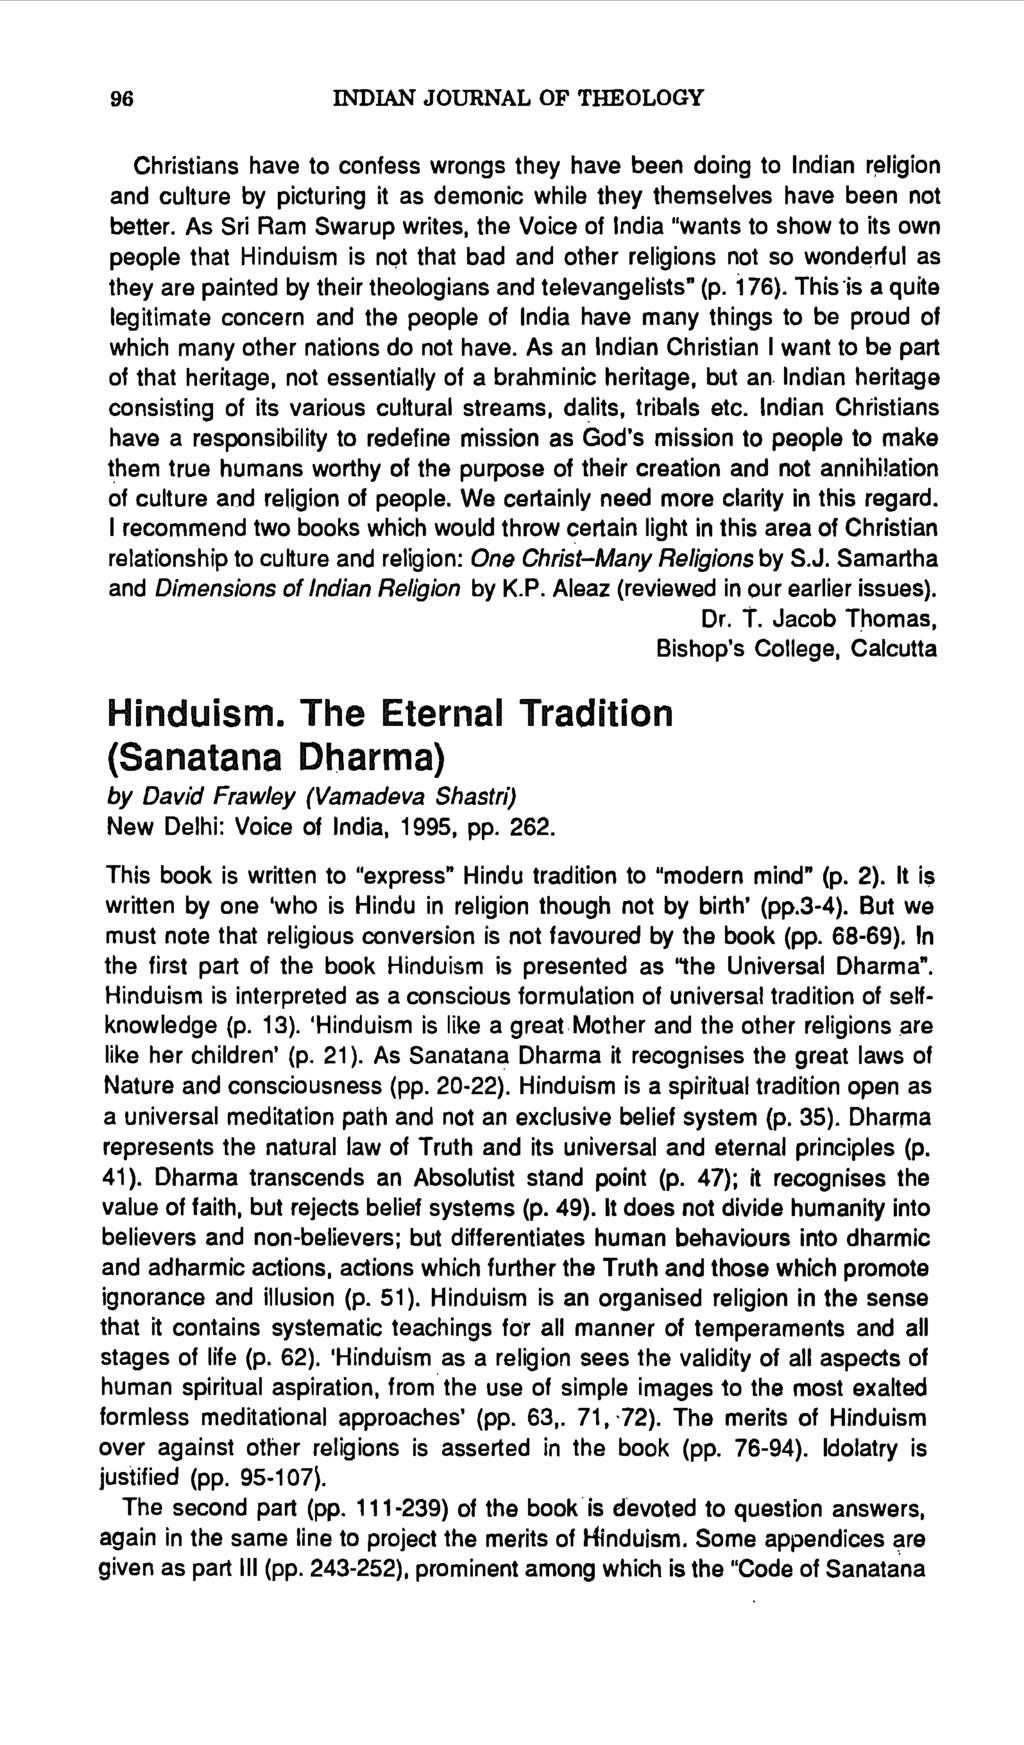 96 INDIAN JOURNAL OF THEOLOGY Christians have to confess wrongs they have been doing to Indian r!31igion and culture by picturing it as demonic while they themselves have been not better.